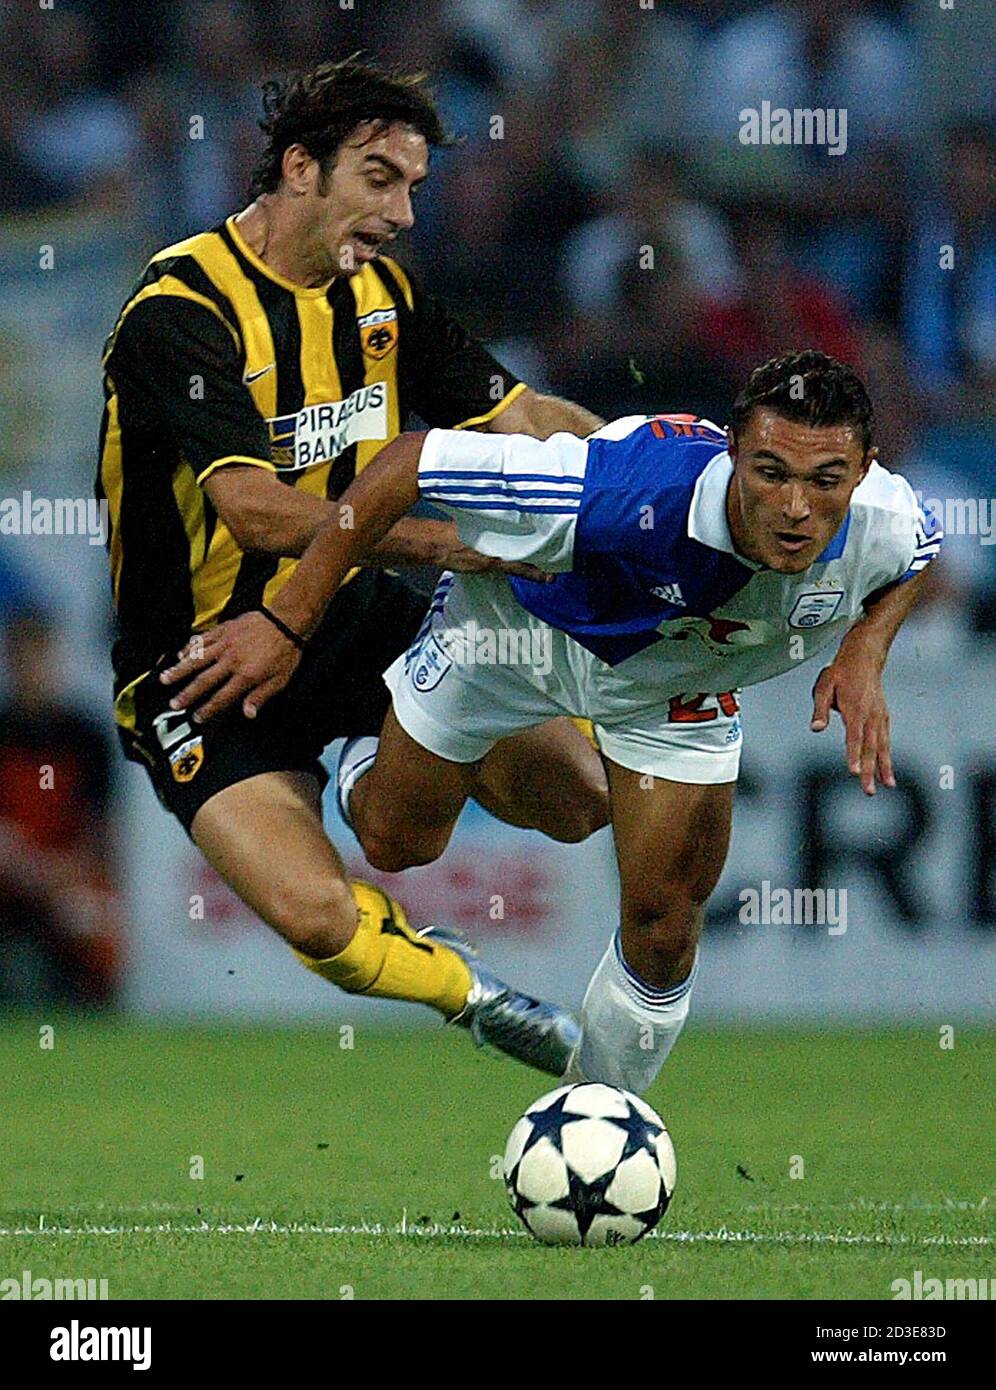 GRASSHOPPER CLUB MITRESKI (R) FIGHTS WITH AEK ATHEN BORBOKIS (L) FOR THE  BALL DURING CHAMPIONS LEAGUE QUALIFYER IN ZURICH Stock Photo - Alamy